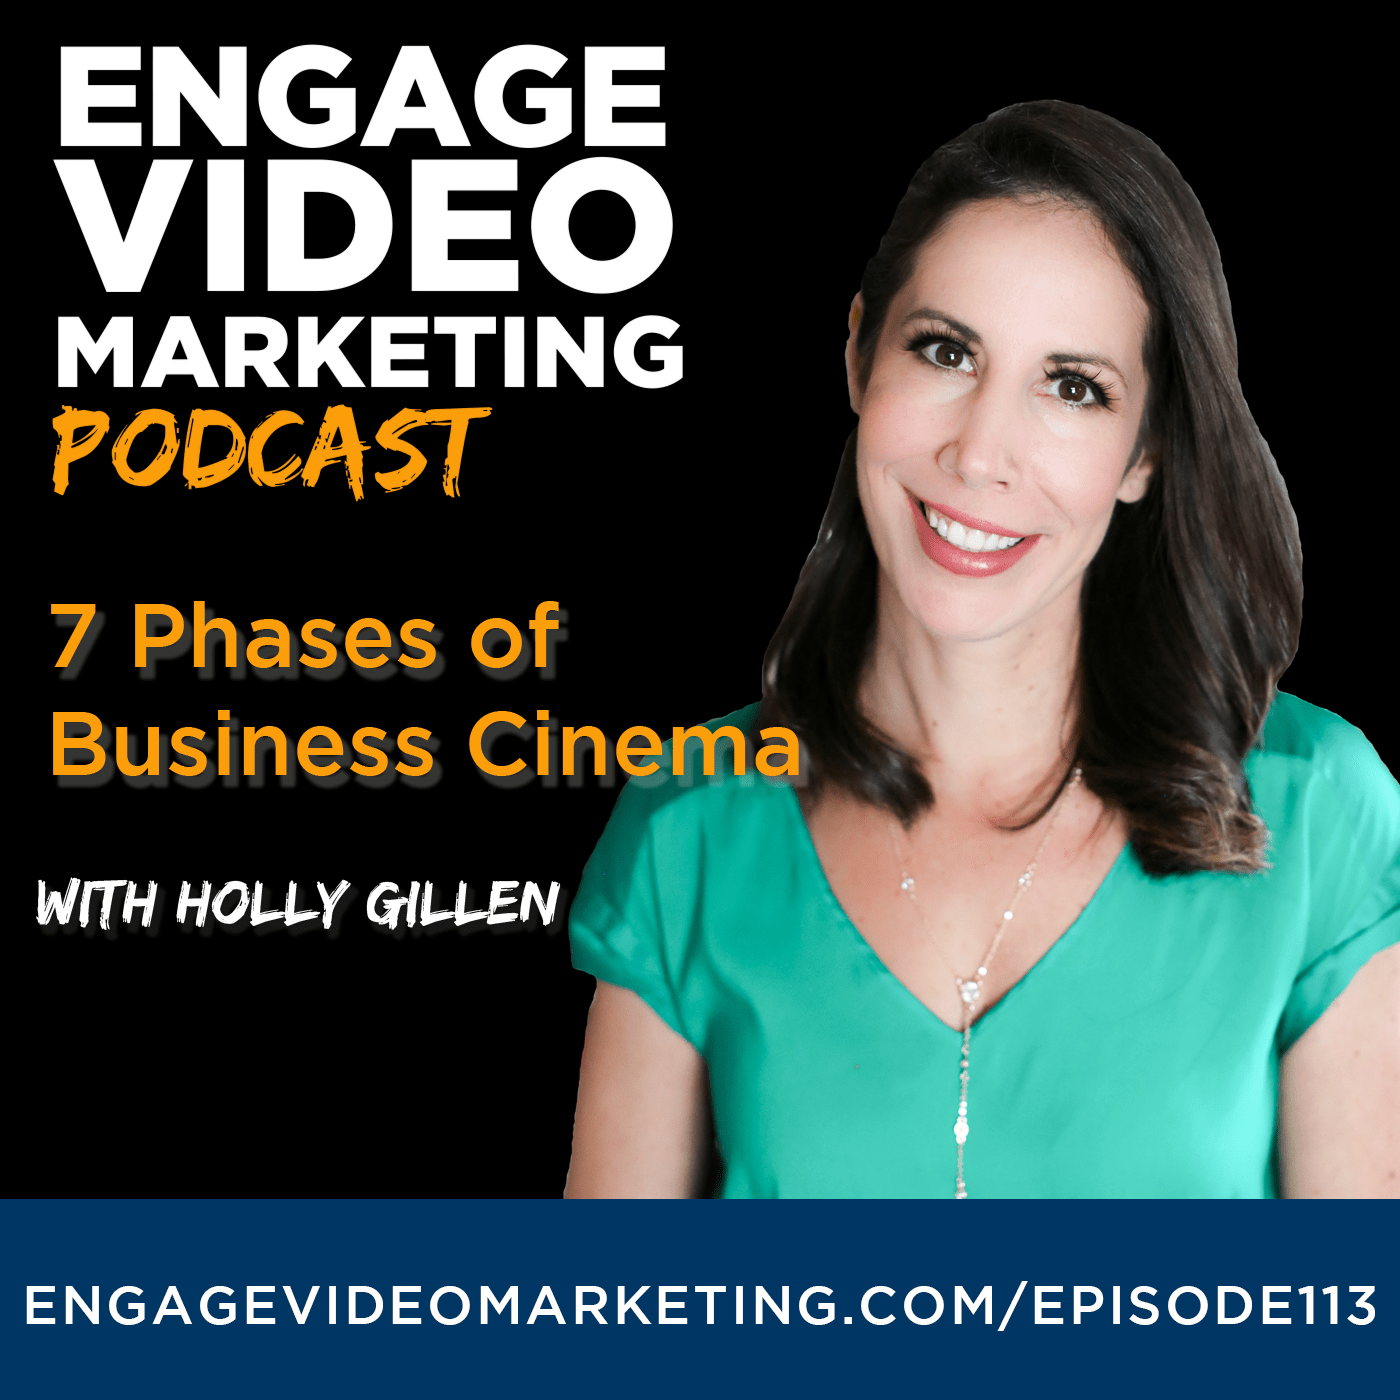 7 Phases of Business Cinema with Holly Gillen